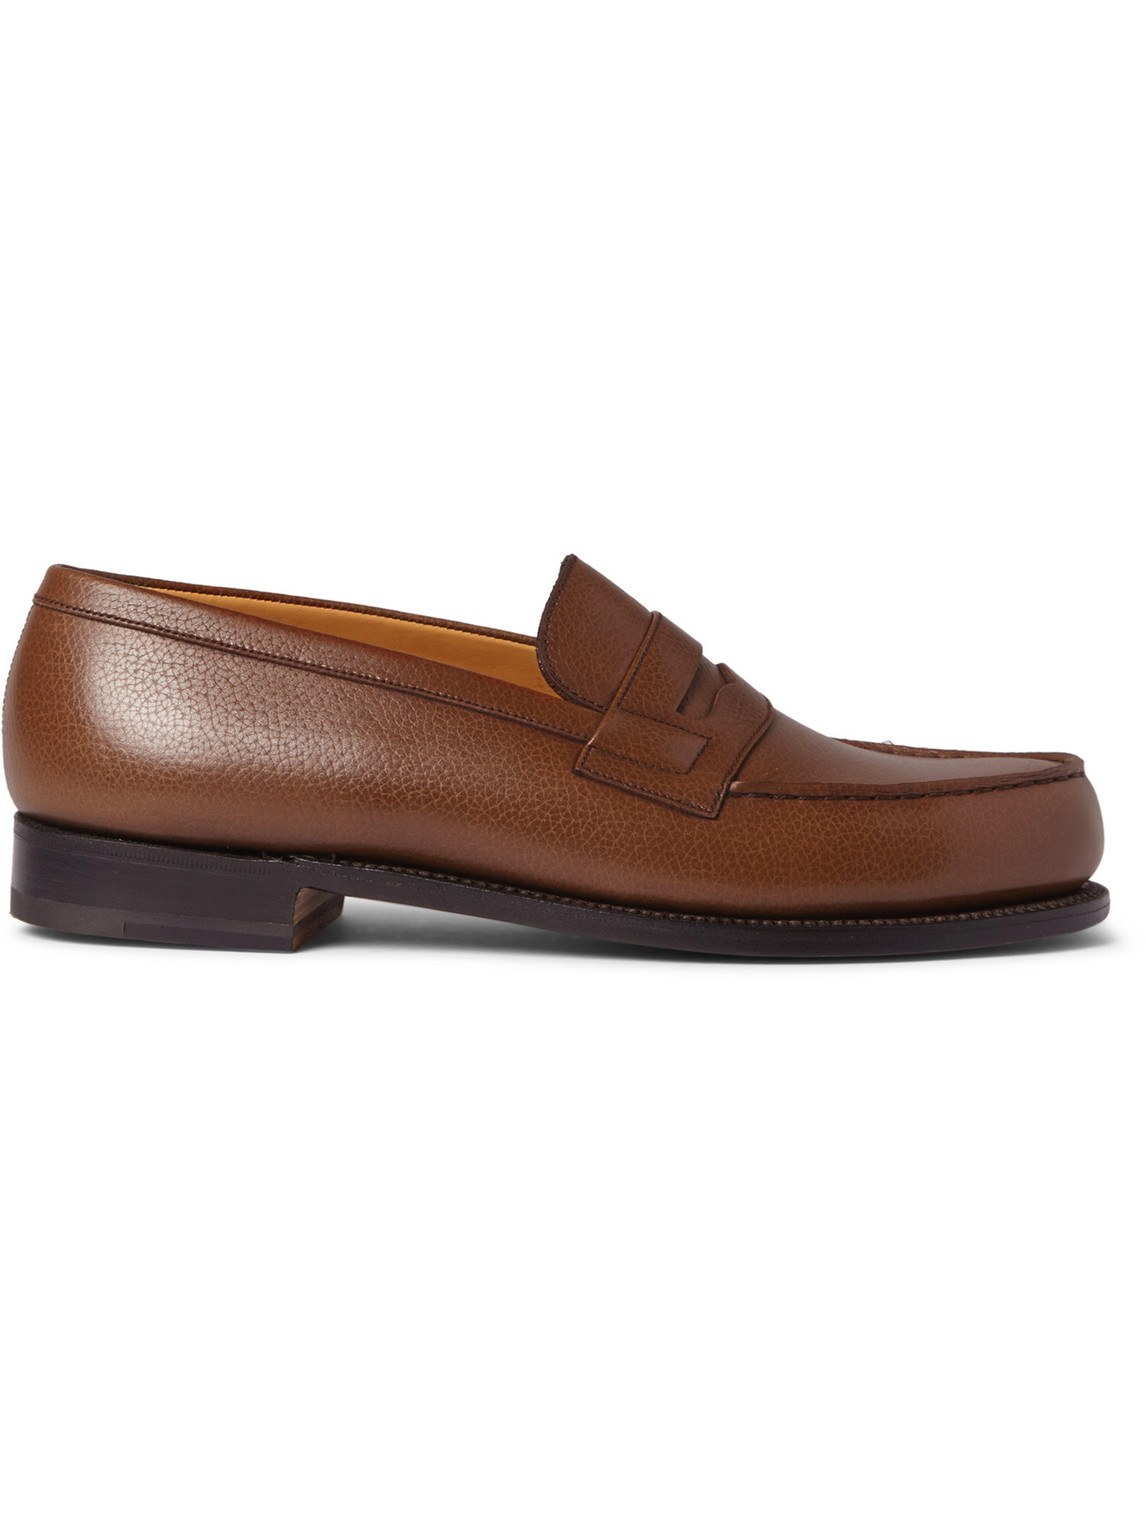 J.M. Weston 180 Moccasin Grained-Leather Loafers